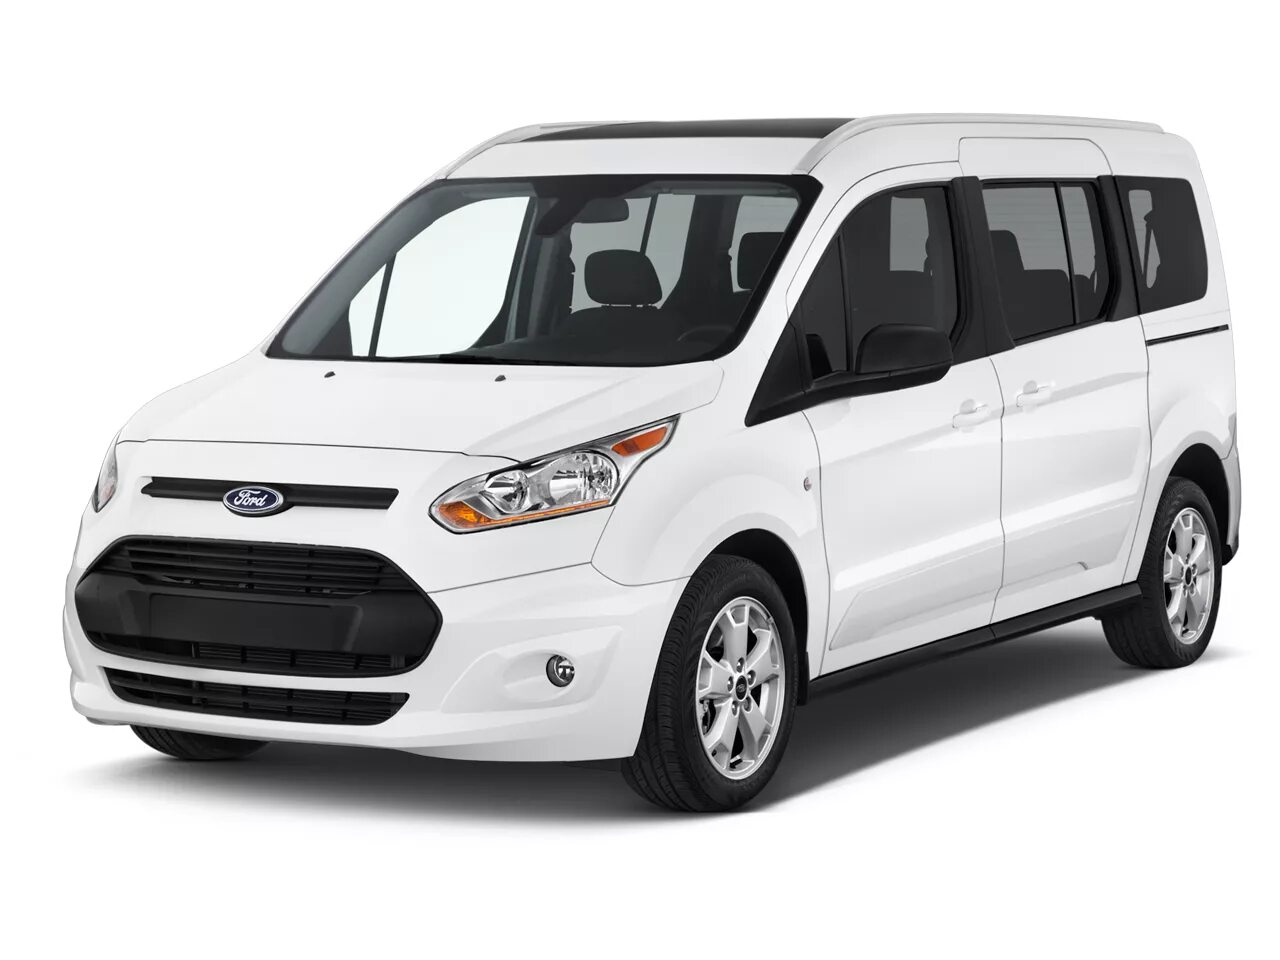 Connect машина. Ford Transit connect 2015. Ford Transit connect 2016. Ford Transit connect 2015 White. Ford Transit connect Wagon 2016.